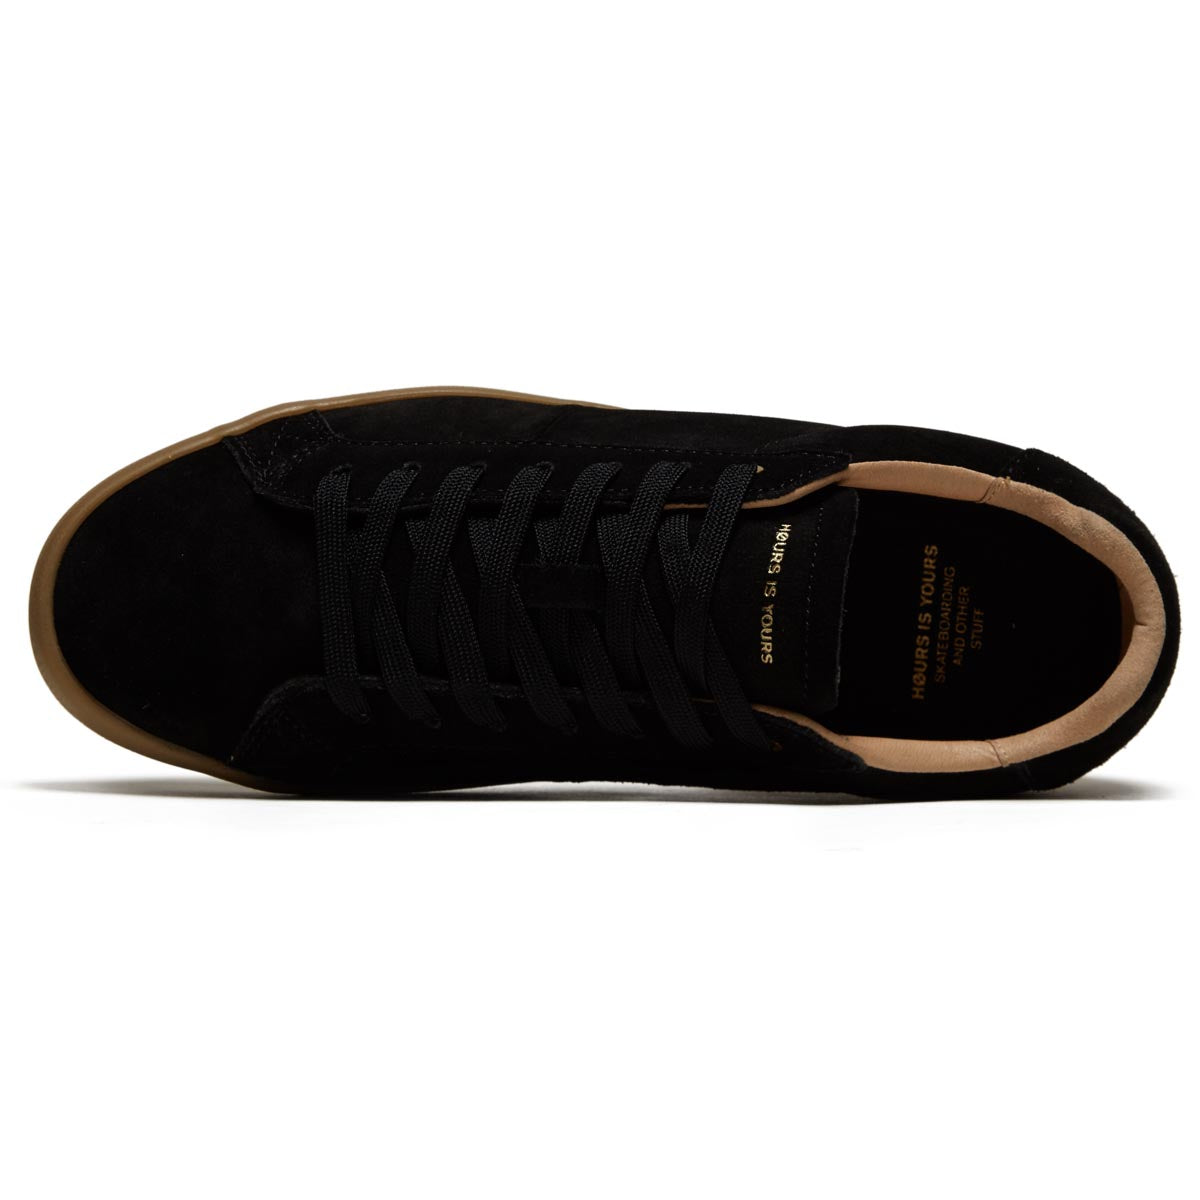 Hours Is Yours C71 Shoes - Black/Gum image 3